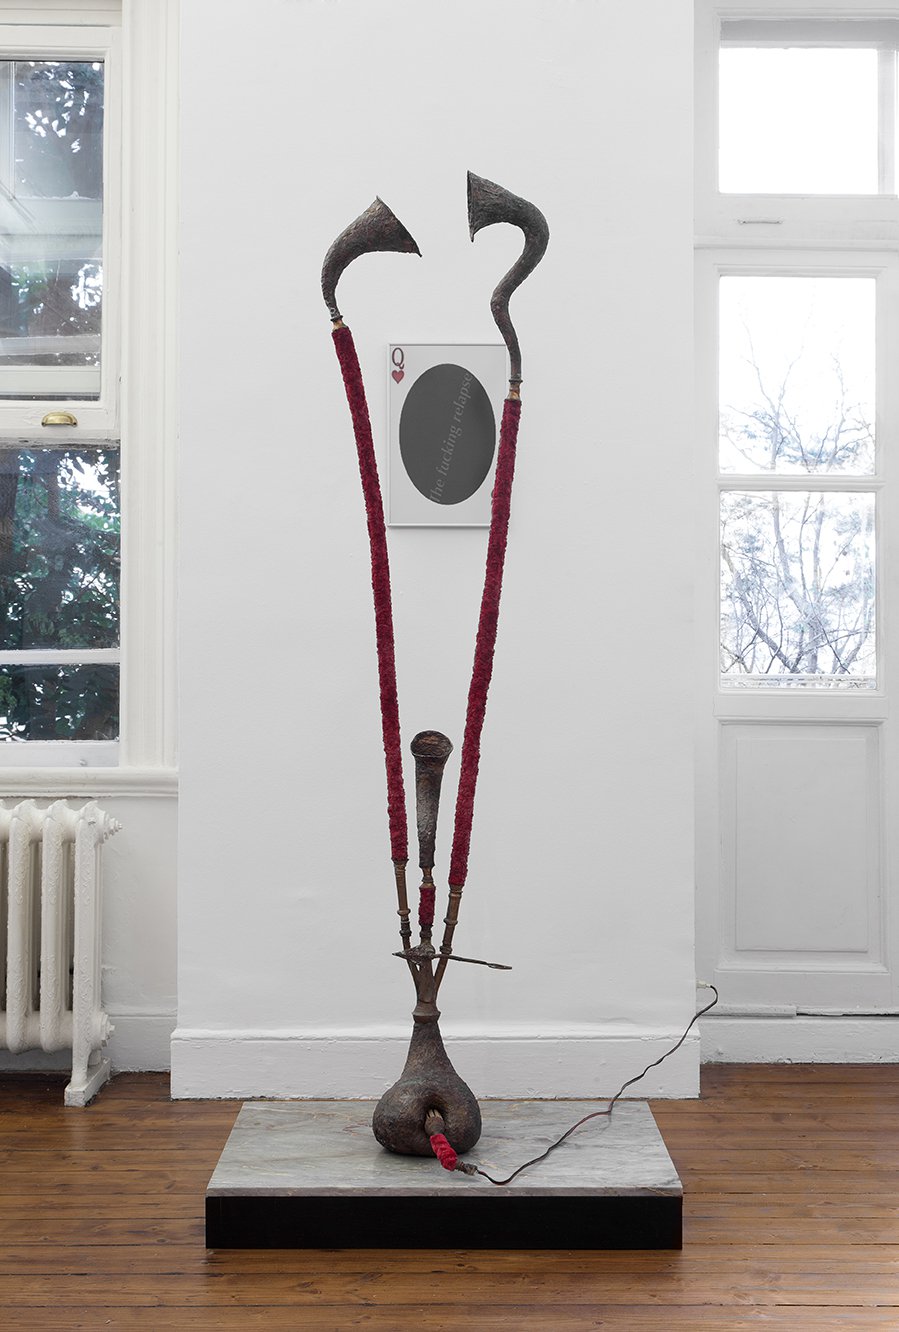 Giorgos Gyparakis, Om, musical wind instrument, copper, fabric, wood, 1997Cara Benedetto, Match 2, archival inkjet print, 43.2 x 27.9 cm (17 x 11 in), 2014